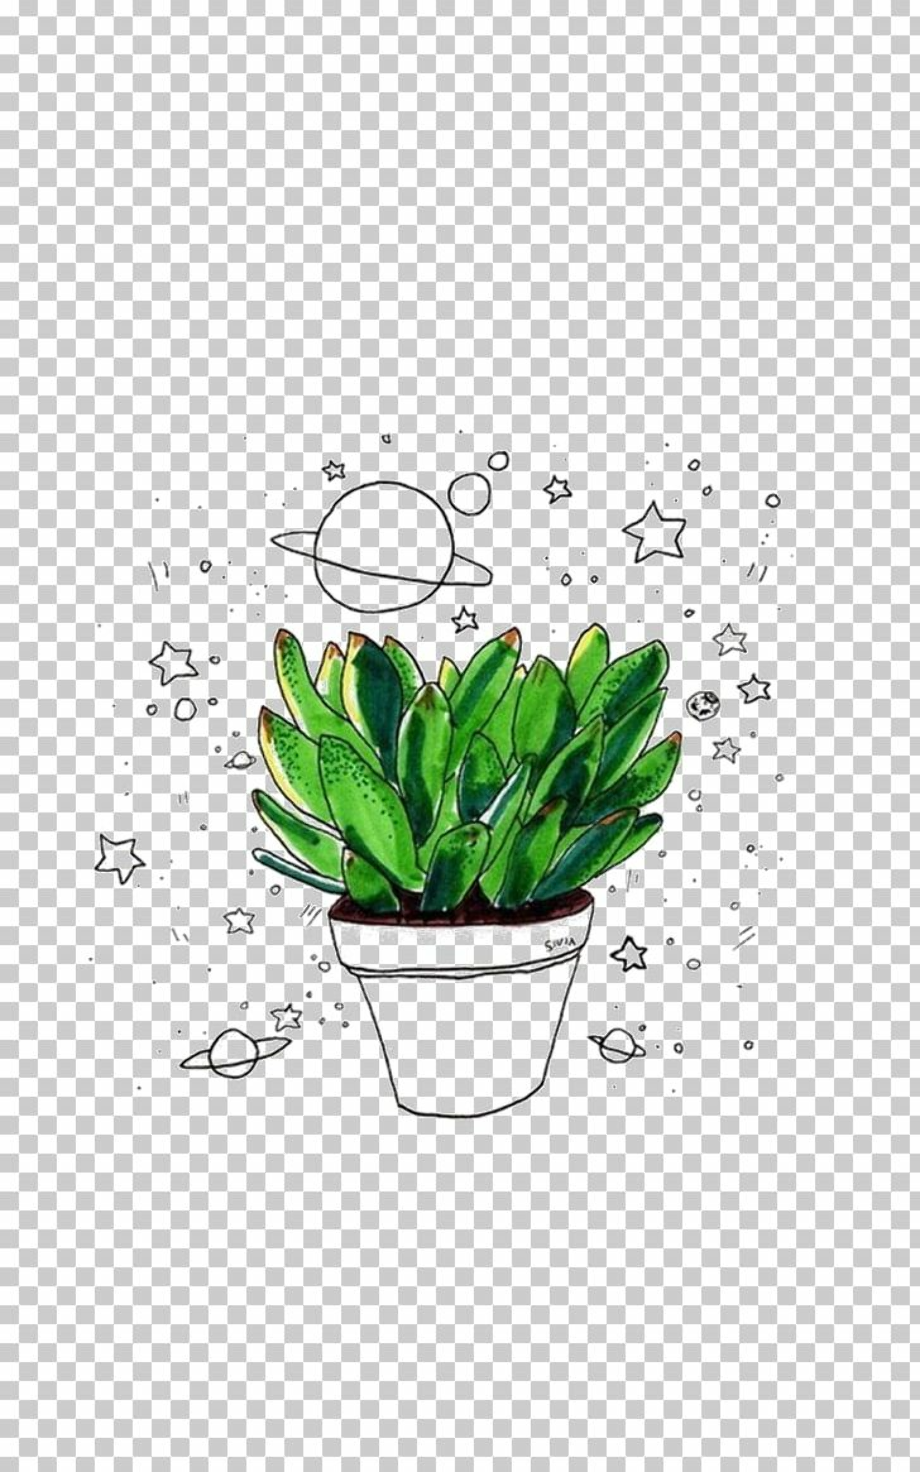 Download High Quality plant clipart aesthetic Transparent PNG Images